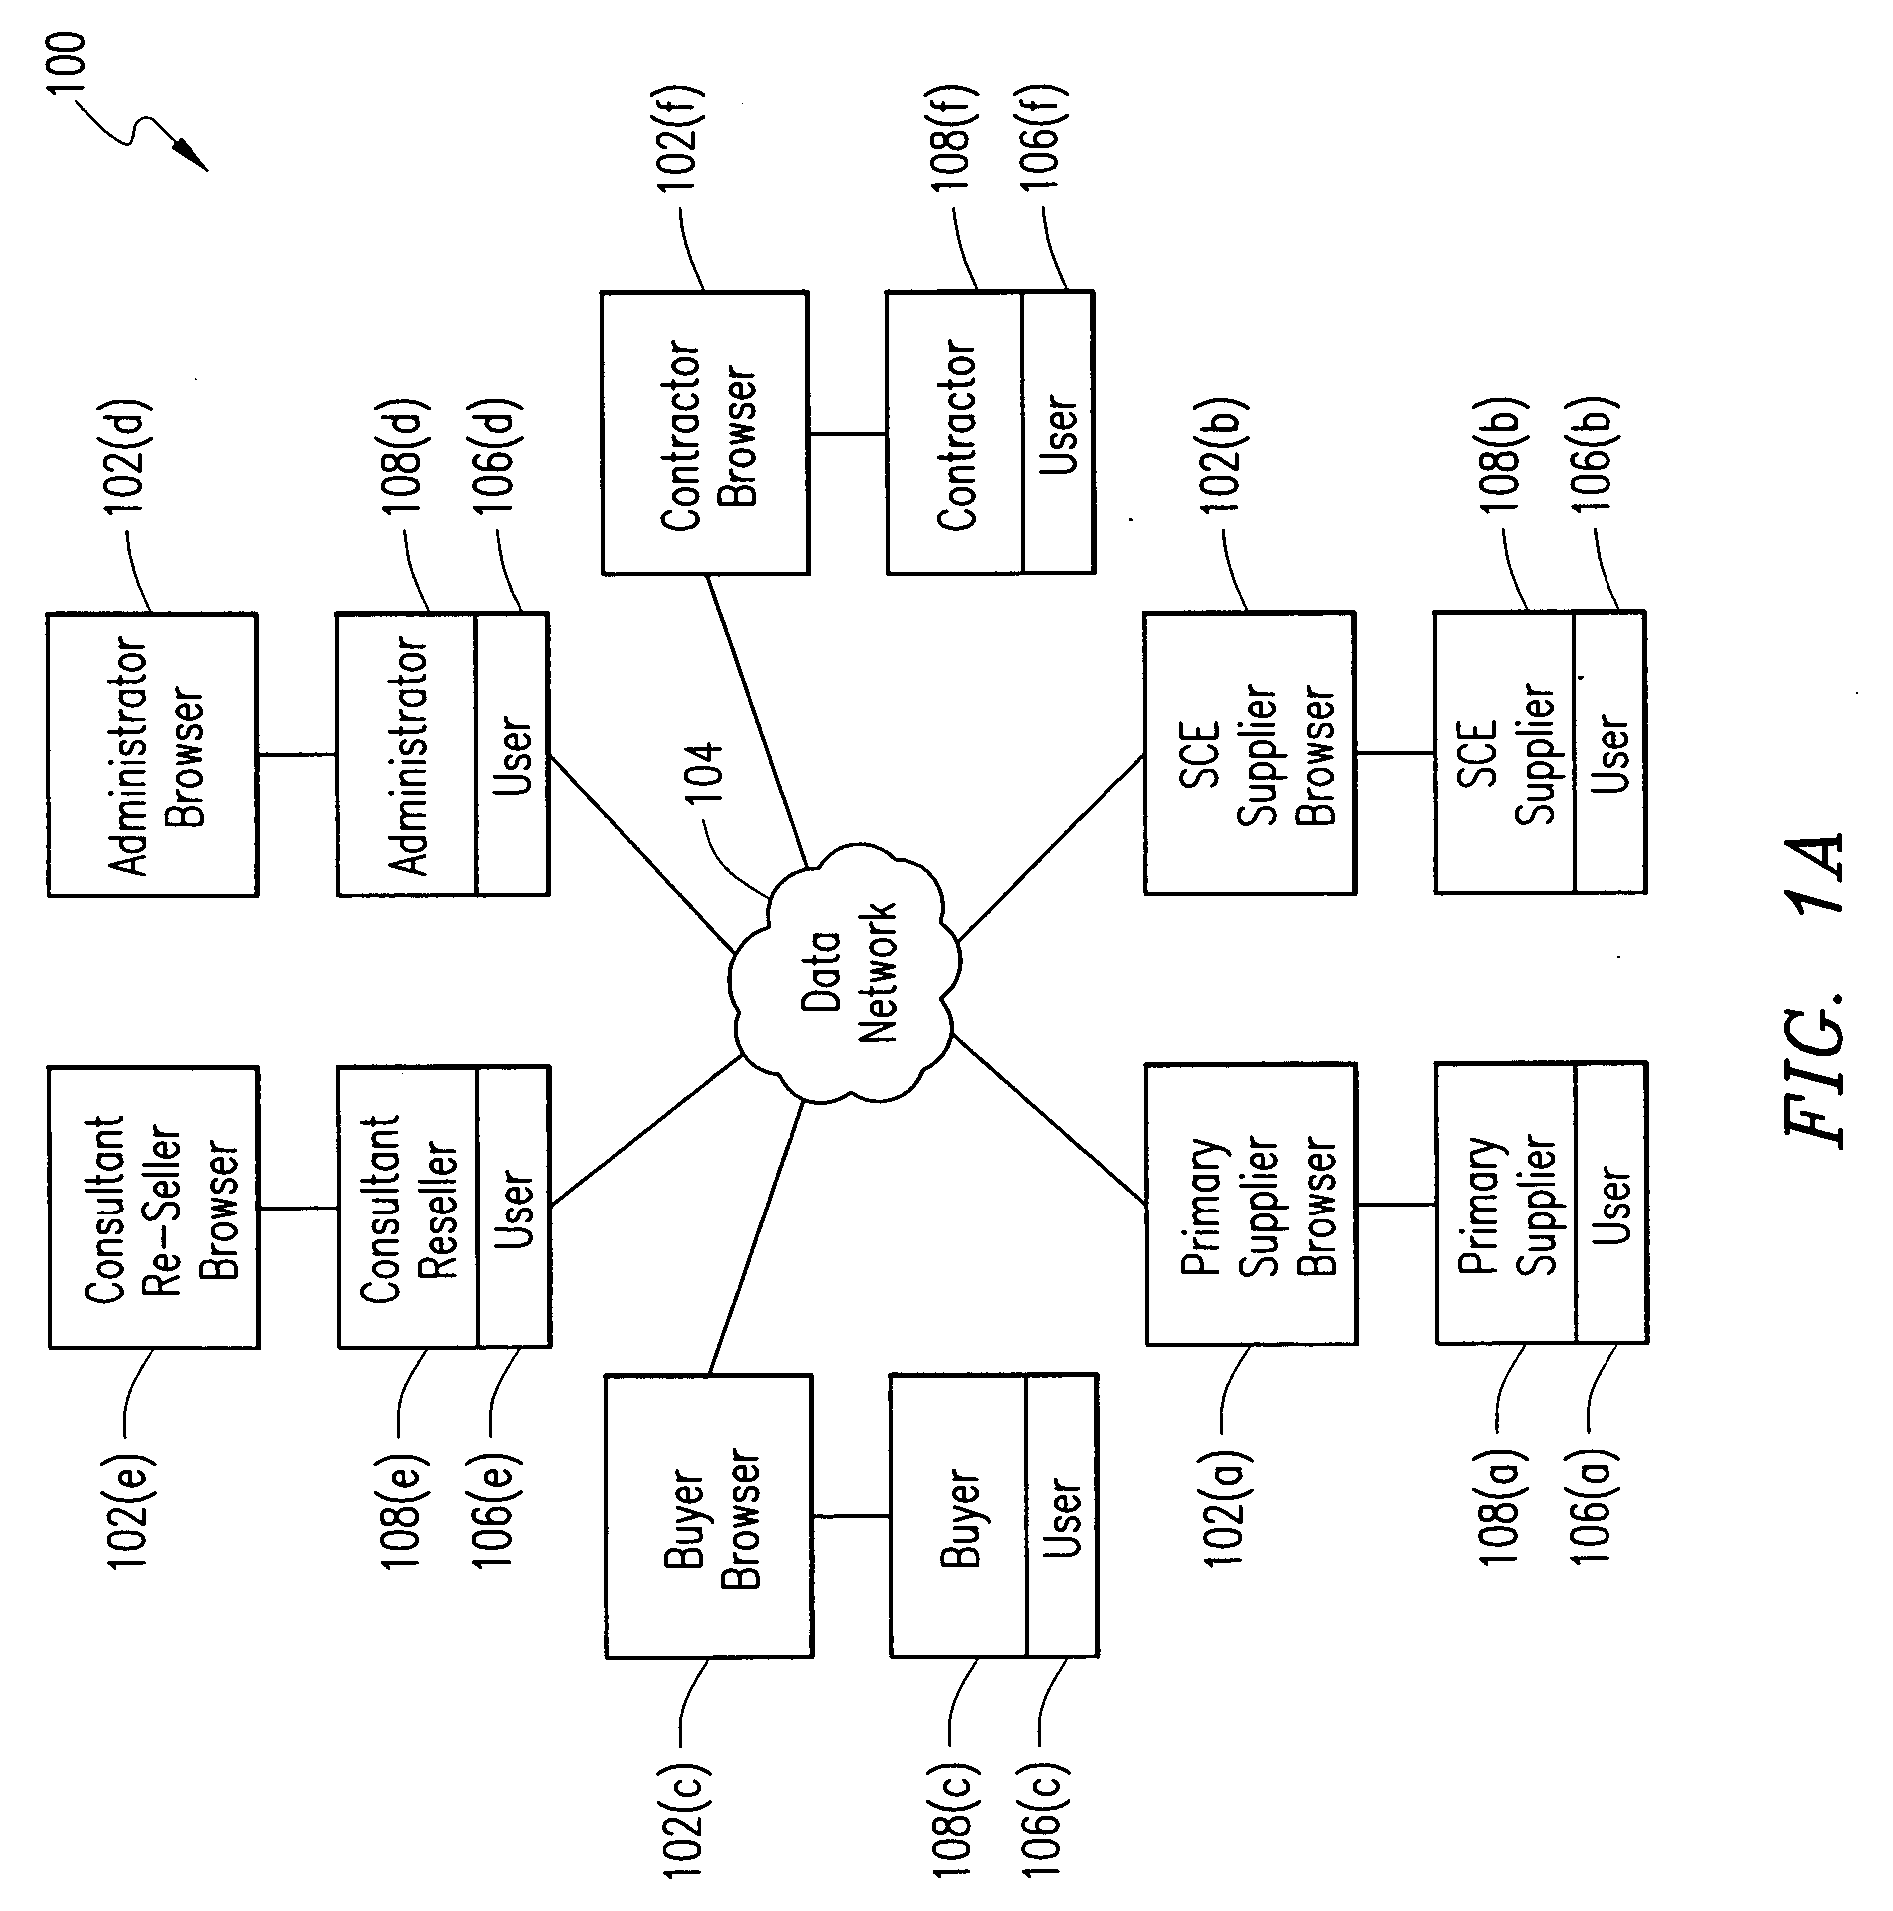 Method of and system for consultant re-seller business information transfer